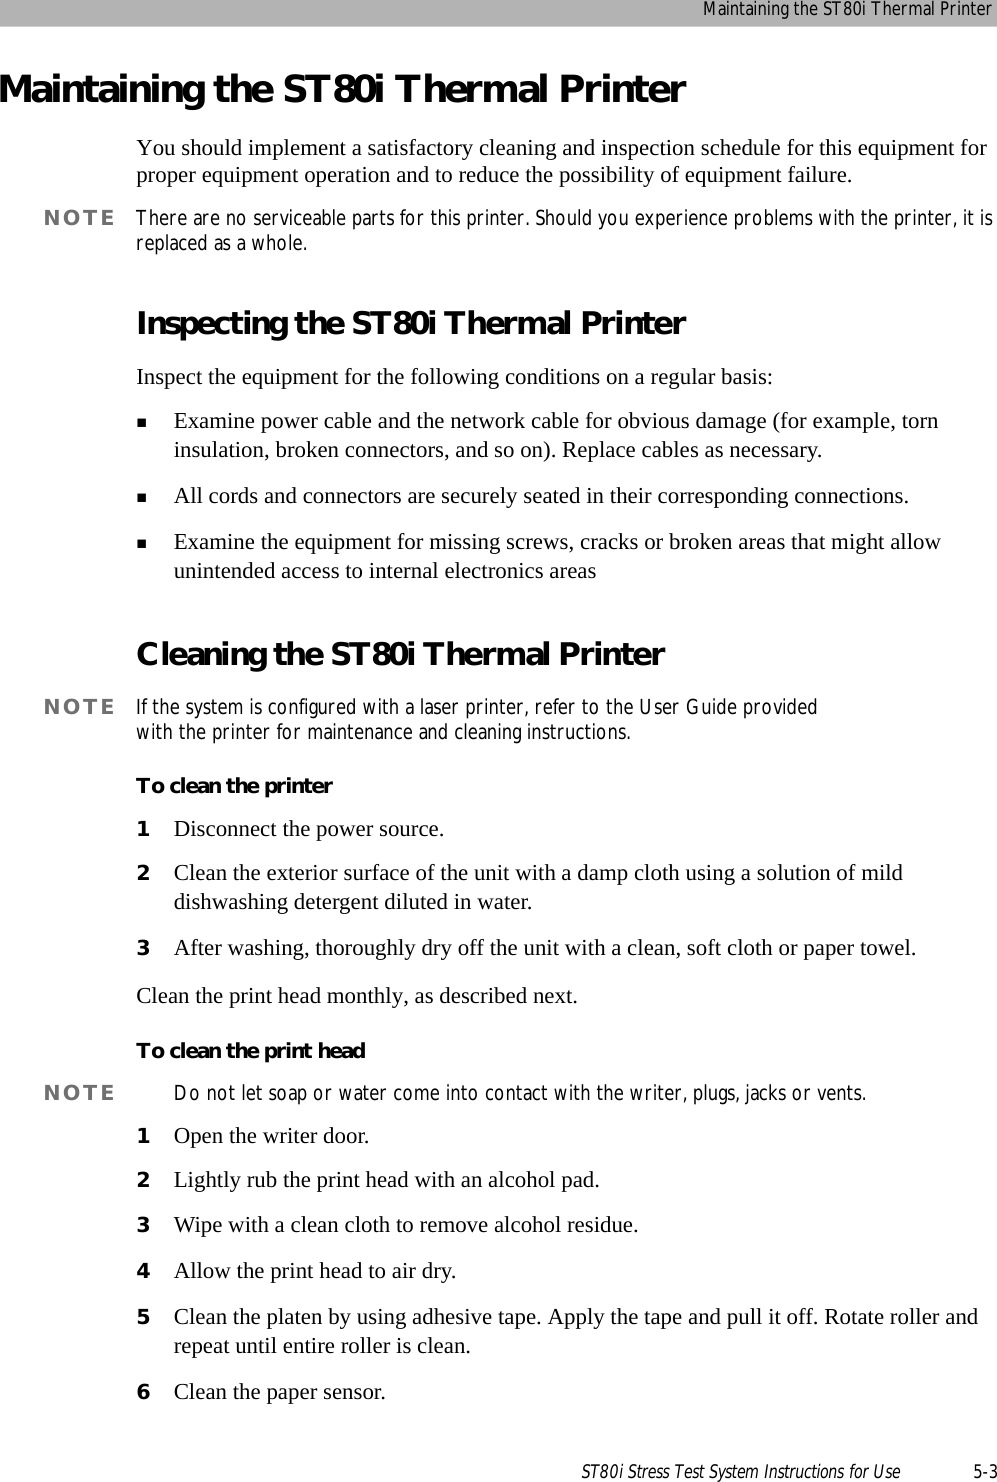 Maintaining the ST80i Thermal PrinterST80i Stress Test System Instructions for Use 5-3Maintaining the ST80i Thermal PrinterYou should implement a satisfactory cleaning and inspection schedule for this equipment for proper equipment operation and to reduce the possibility of equipment failure. NOTE There are no serviceable parts for this printer. Should you experience problems with the printer, it is replaced as a whole. Inspecting the ST80i Thermal PrinterInspect the equipment for the following conditions on a regular basis:Examine power cable and the network cable for obvious damage (for example, torn insulation, broken connectors, and so on). Replace cables as necessary.All cords and connectors are securely seated in their corresponding connections.Examine the equipment for missing screws, cracks or broken areas that might allow unintended access to internal electronics areasCleaning the ST80i Thermal PrinterNOTE If the system is configured with a laser printer, refer to the User Guide provided with the printer for maintenance and cleaning instructions.To clean the printer1Disconnect the power source. 2Clean the exterior surface of the unit with a damp cloth using a solution of mild dishwashing detergent diluted in water. 3After washing, thoroughly dry off the unit with a clean, soft cloth or paper towel.Clean the print head monthly, as described next.To clean the print headNOTE Do not let soap or water come into contact with the writer, plugs, jacks or vents. 1Open the writer door.2Lightly rub the print head with an alcohol pad.3Wipe with a clean cloth to remove alcohol residue.4Allow the print head to air dry.5Clean the platen by using adhesive tape. Apply the tape and pull it off. Rotate roller and repeat until entire roller is clean.6Clean the paper sensor.